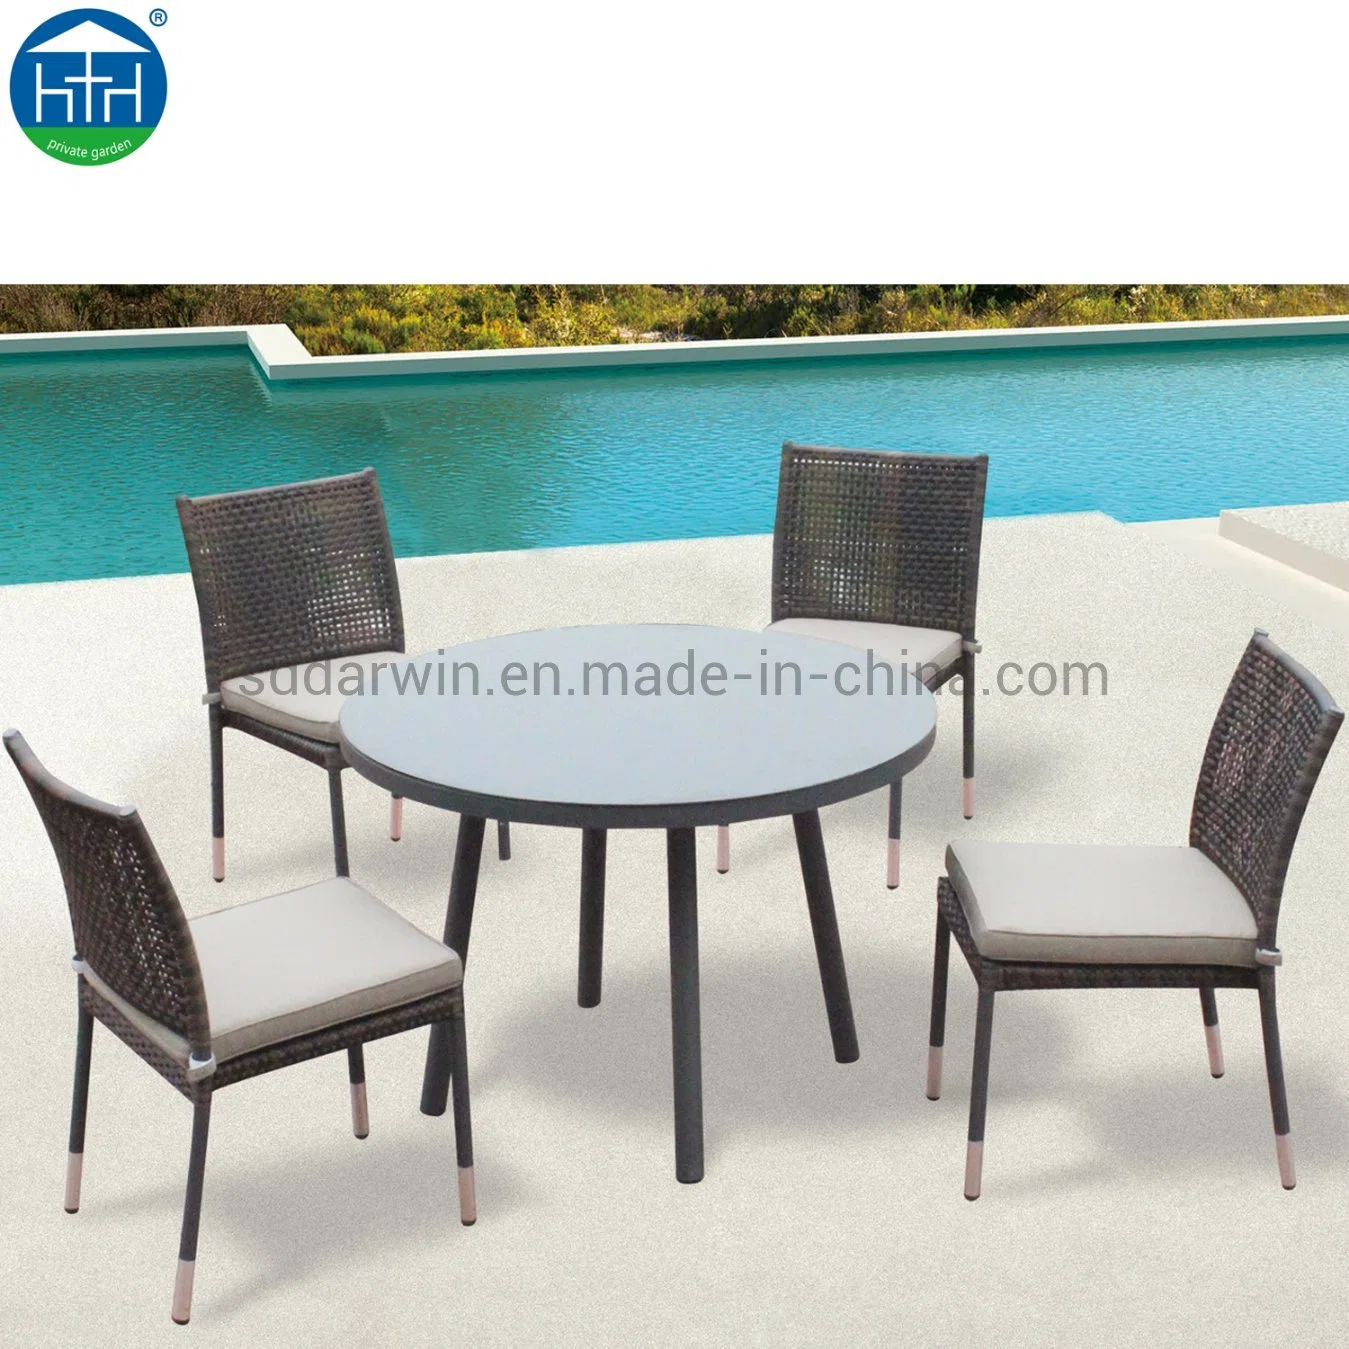 Teak Wood Outdoor Furniture Garden Set Table and Chair Luxury Patio Garden Furniture for Outdoor Dining Room